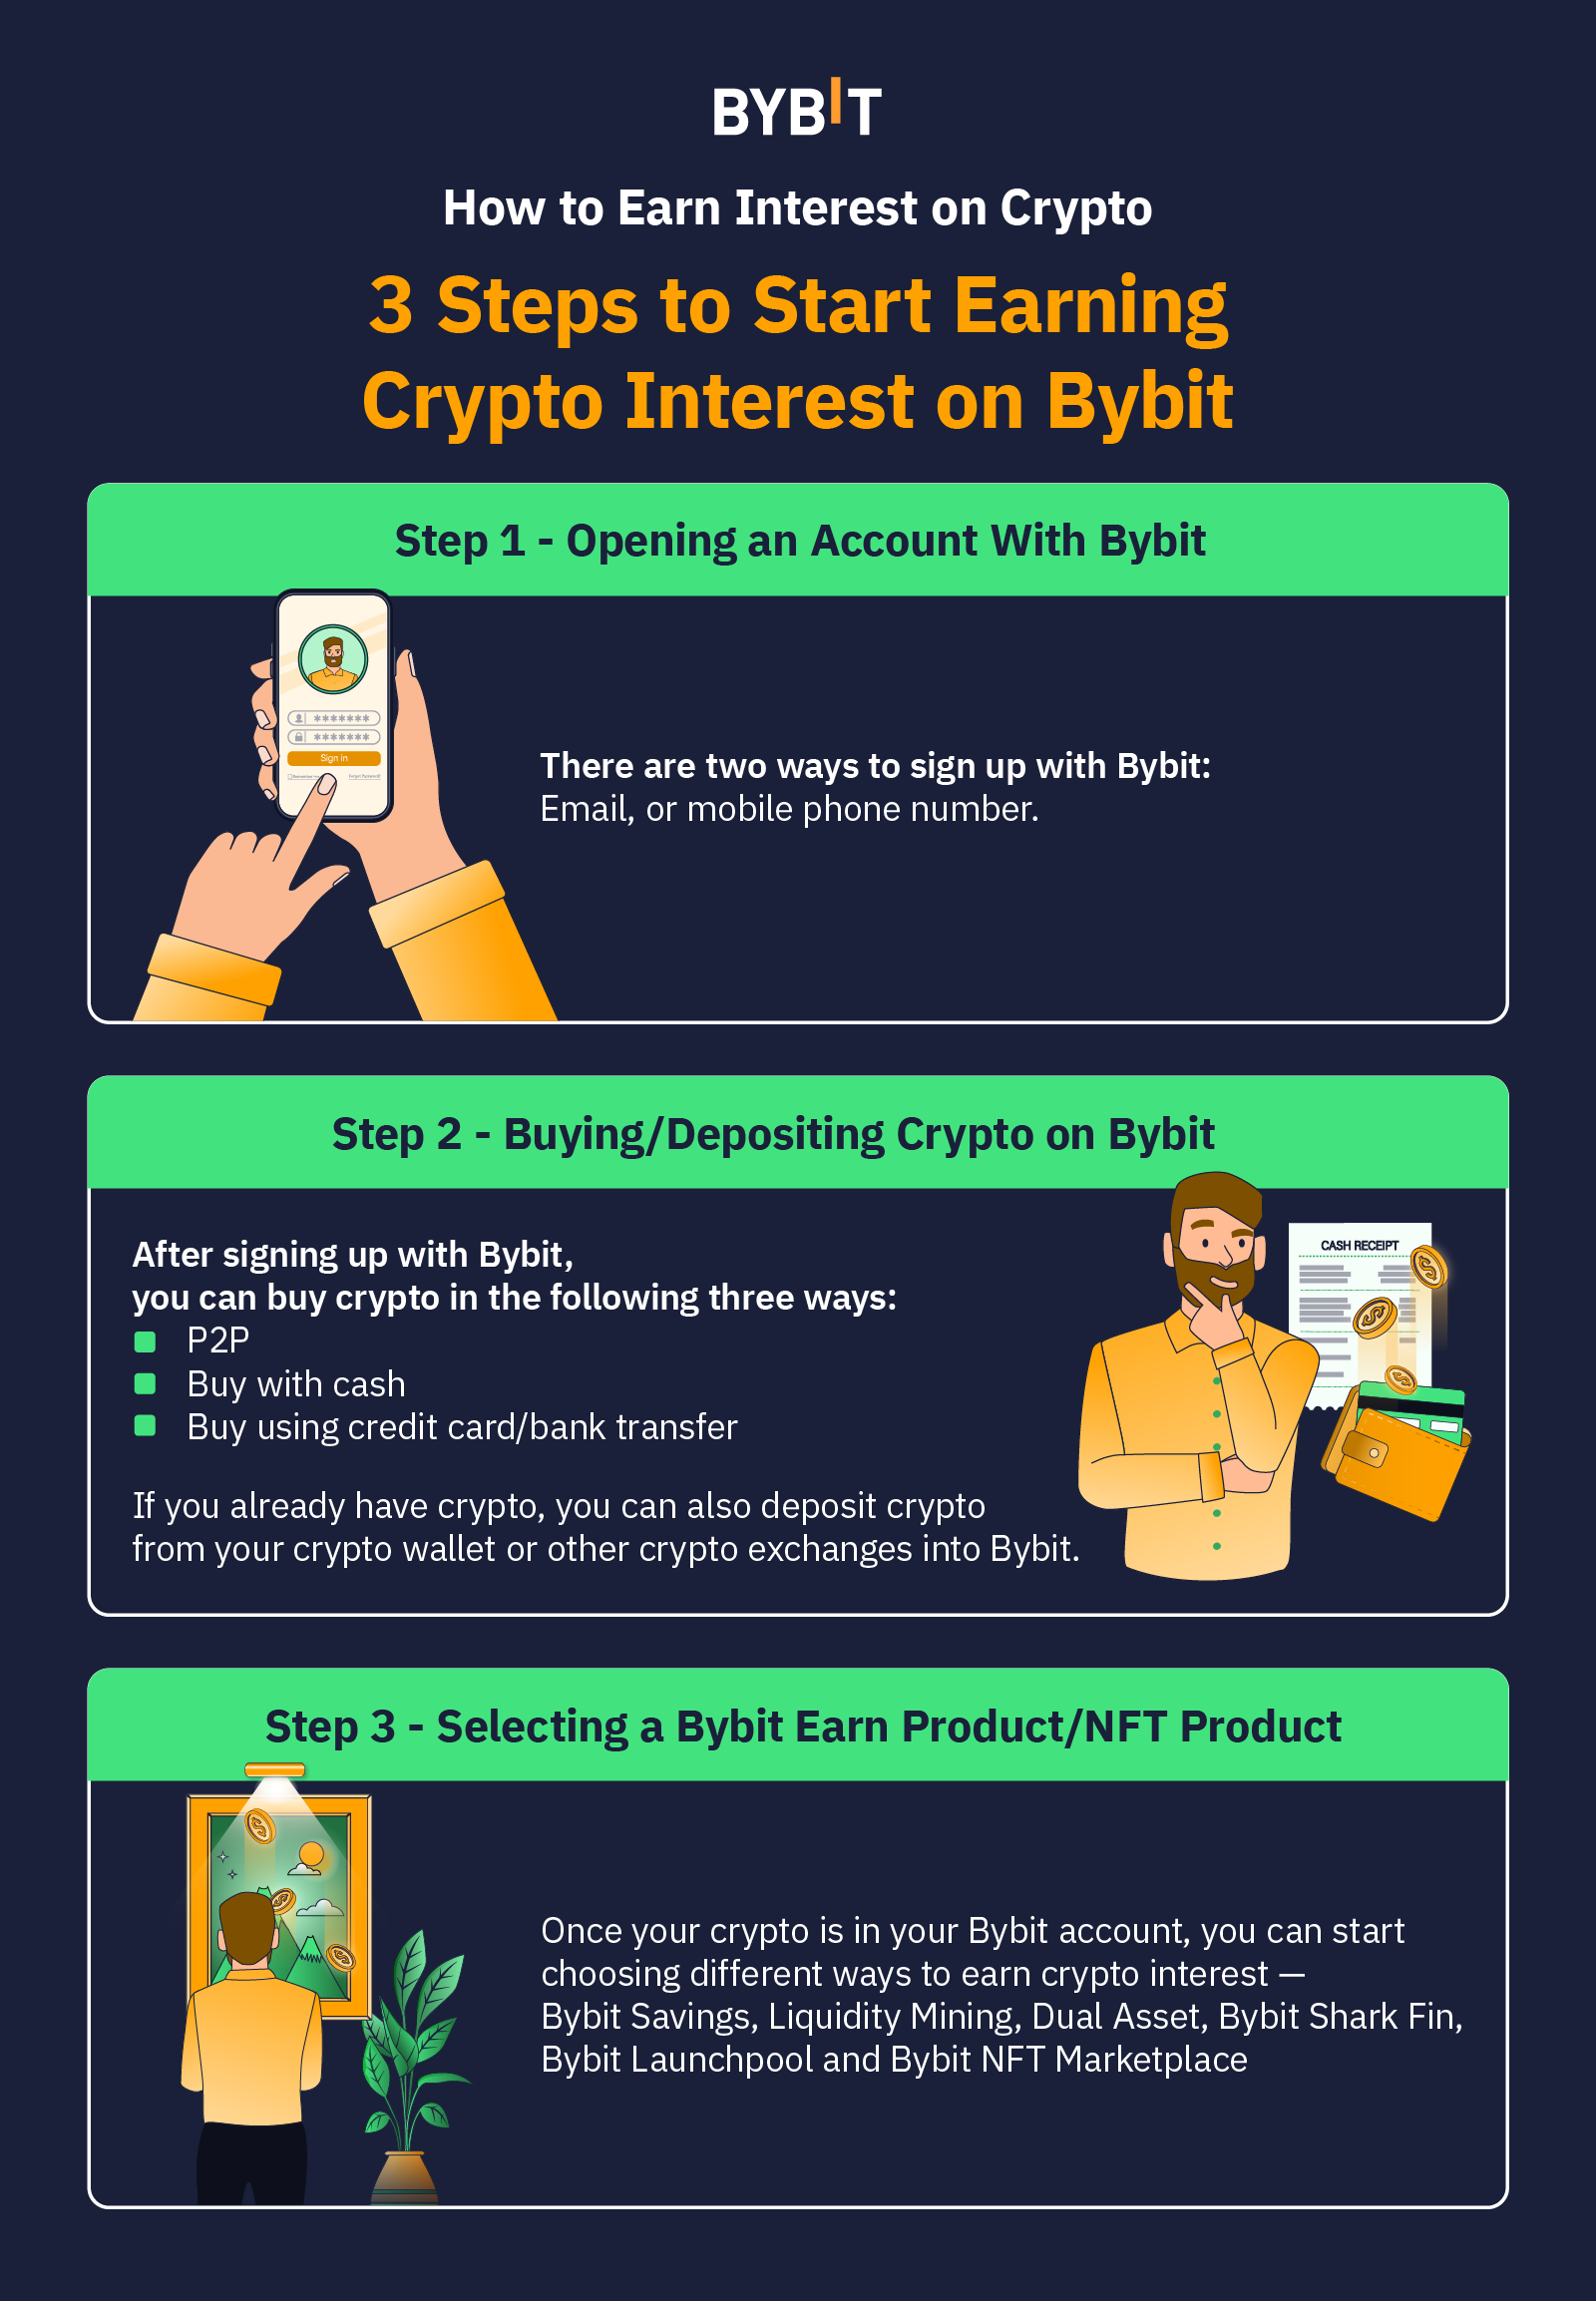 3 steps to start earning crypto interest on Bybit